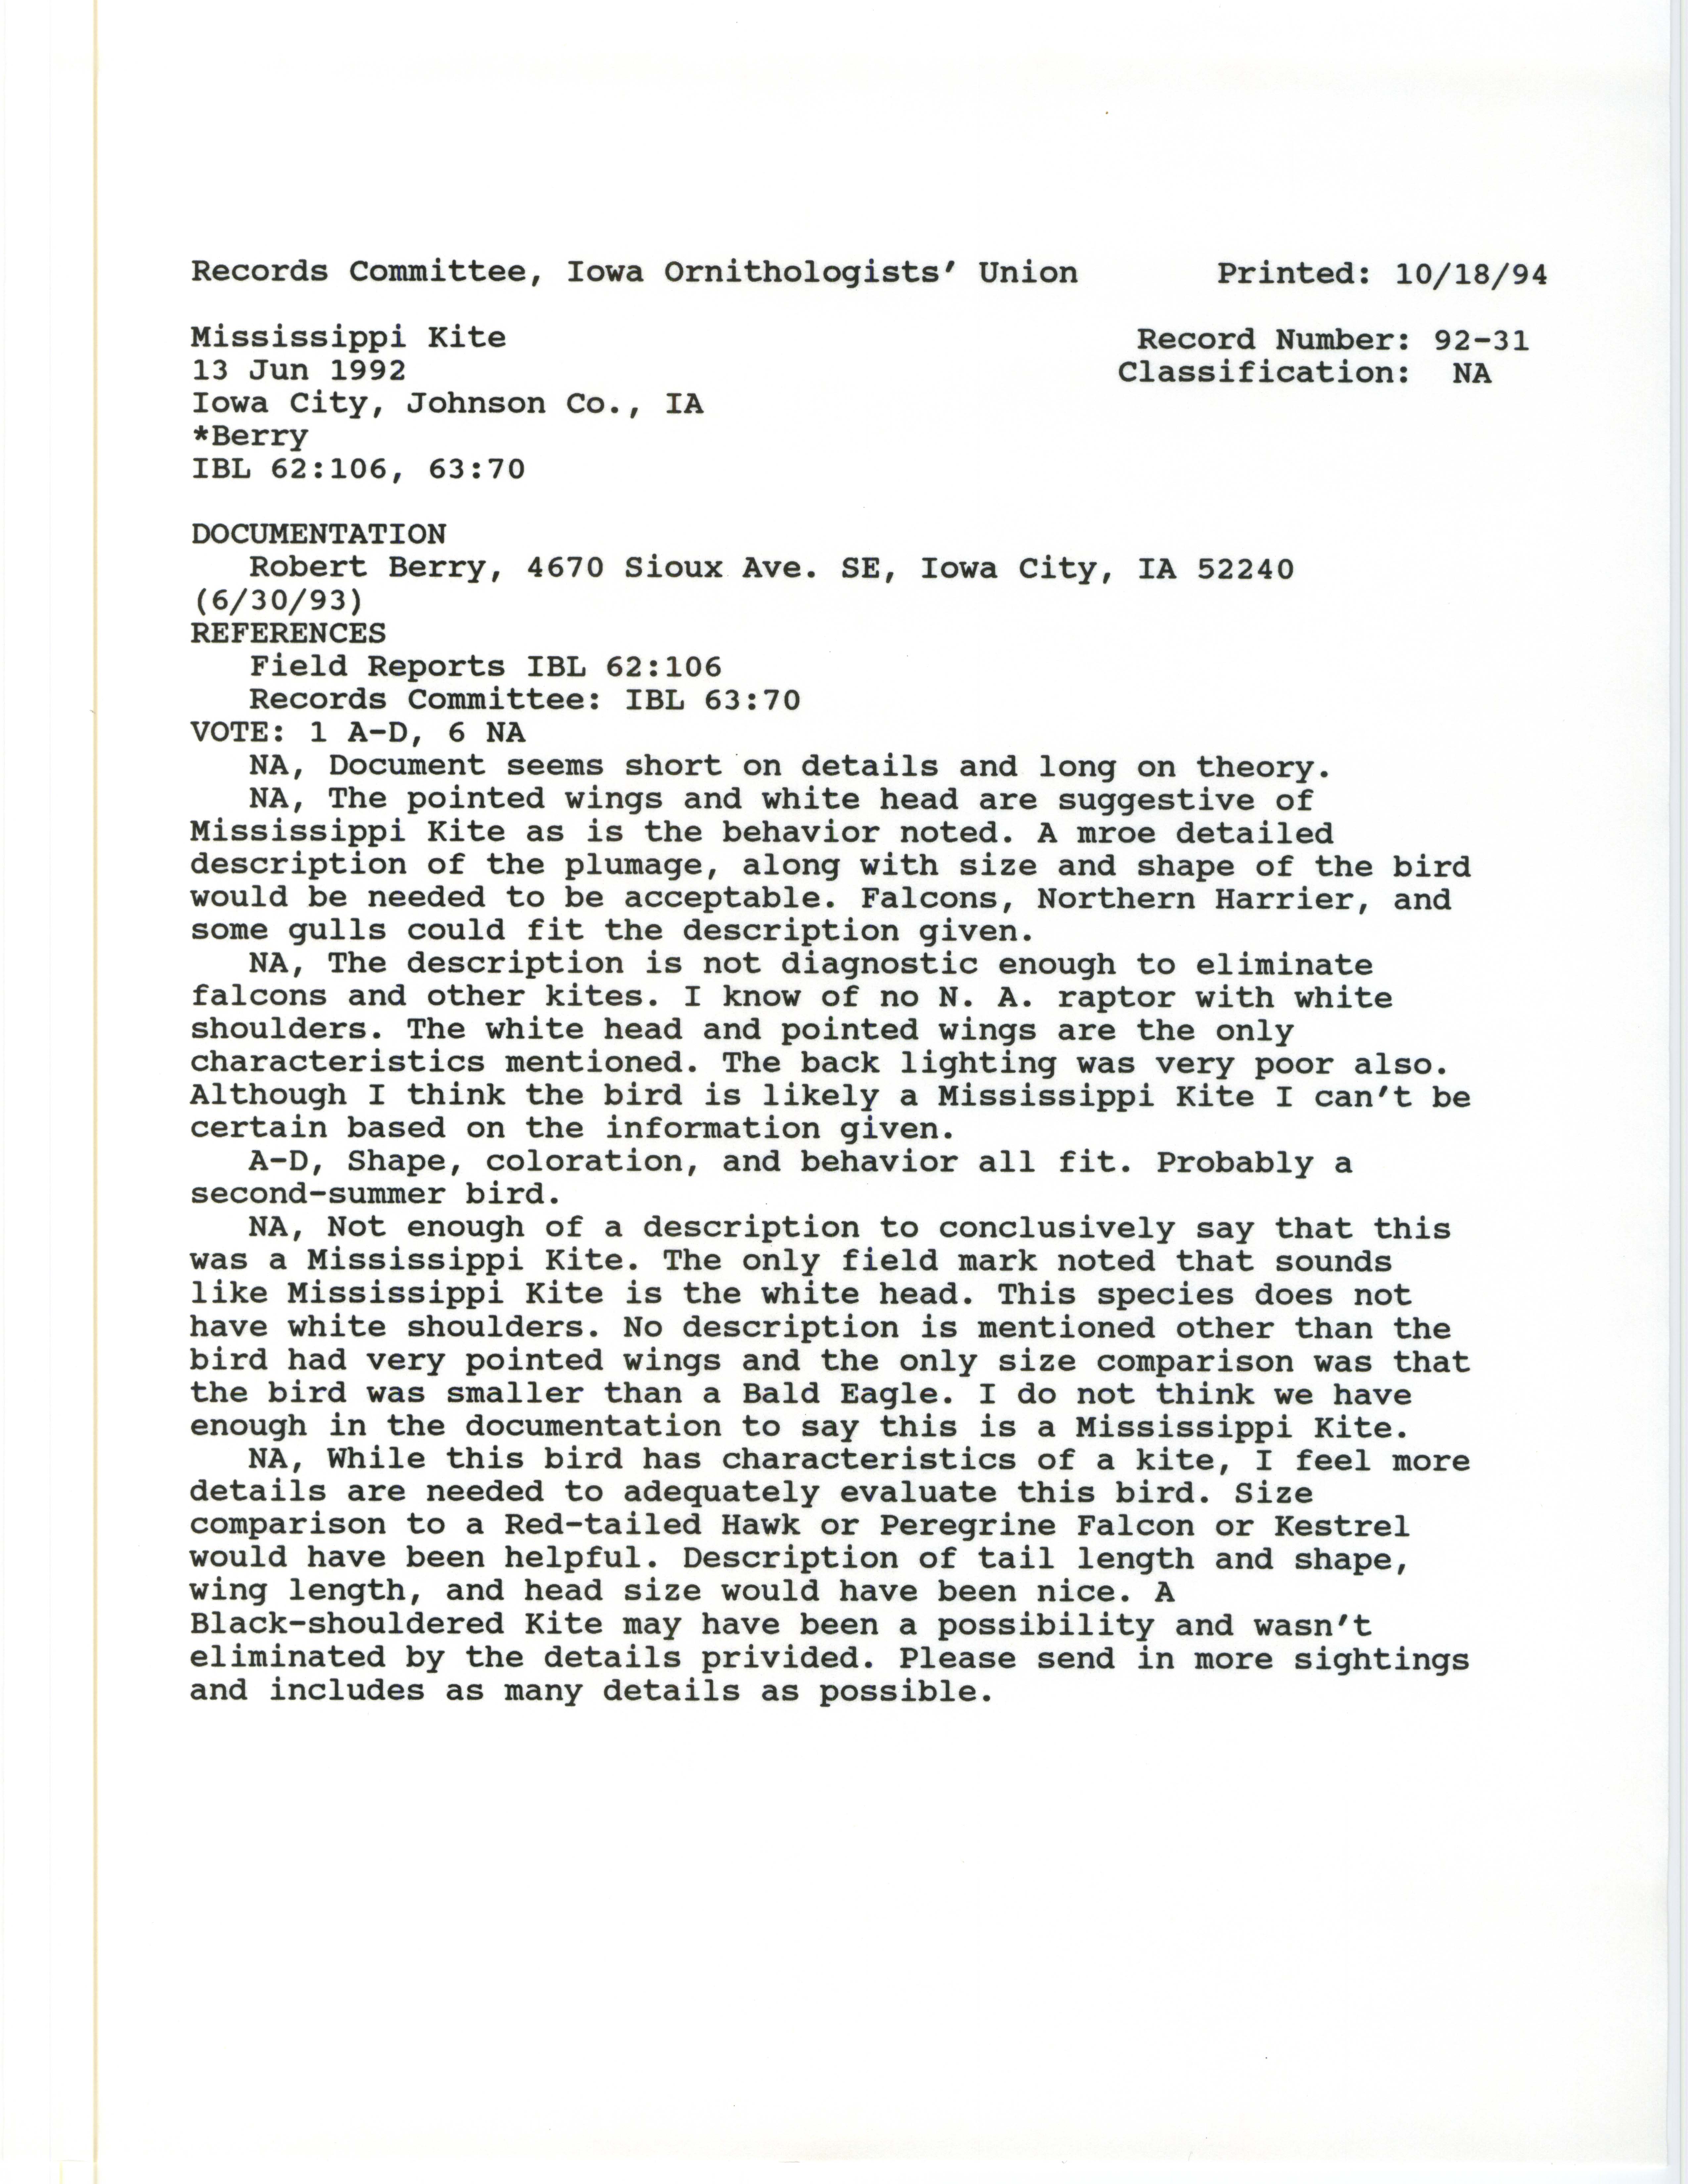 Records Committee review for rare bird sighting of Mississippi Kite at Iowa City, 1992